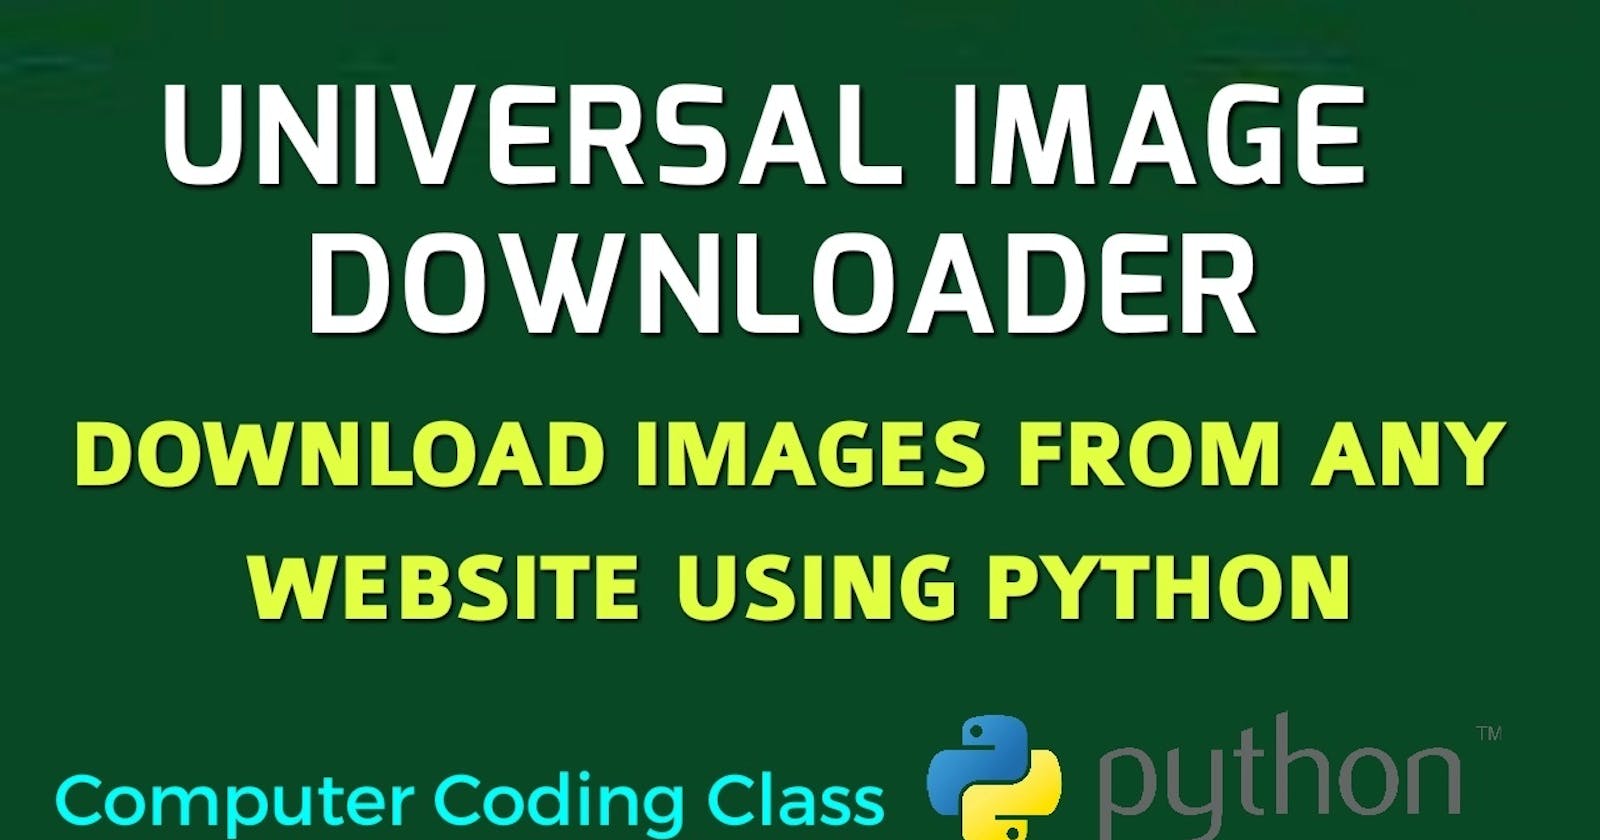 How to Download Image from URL in Python